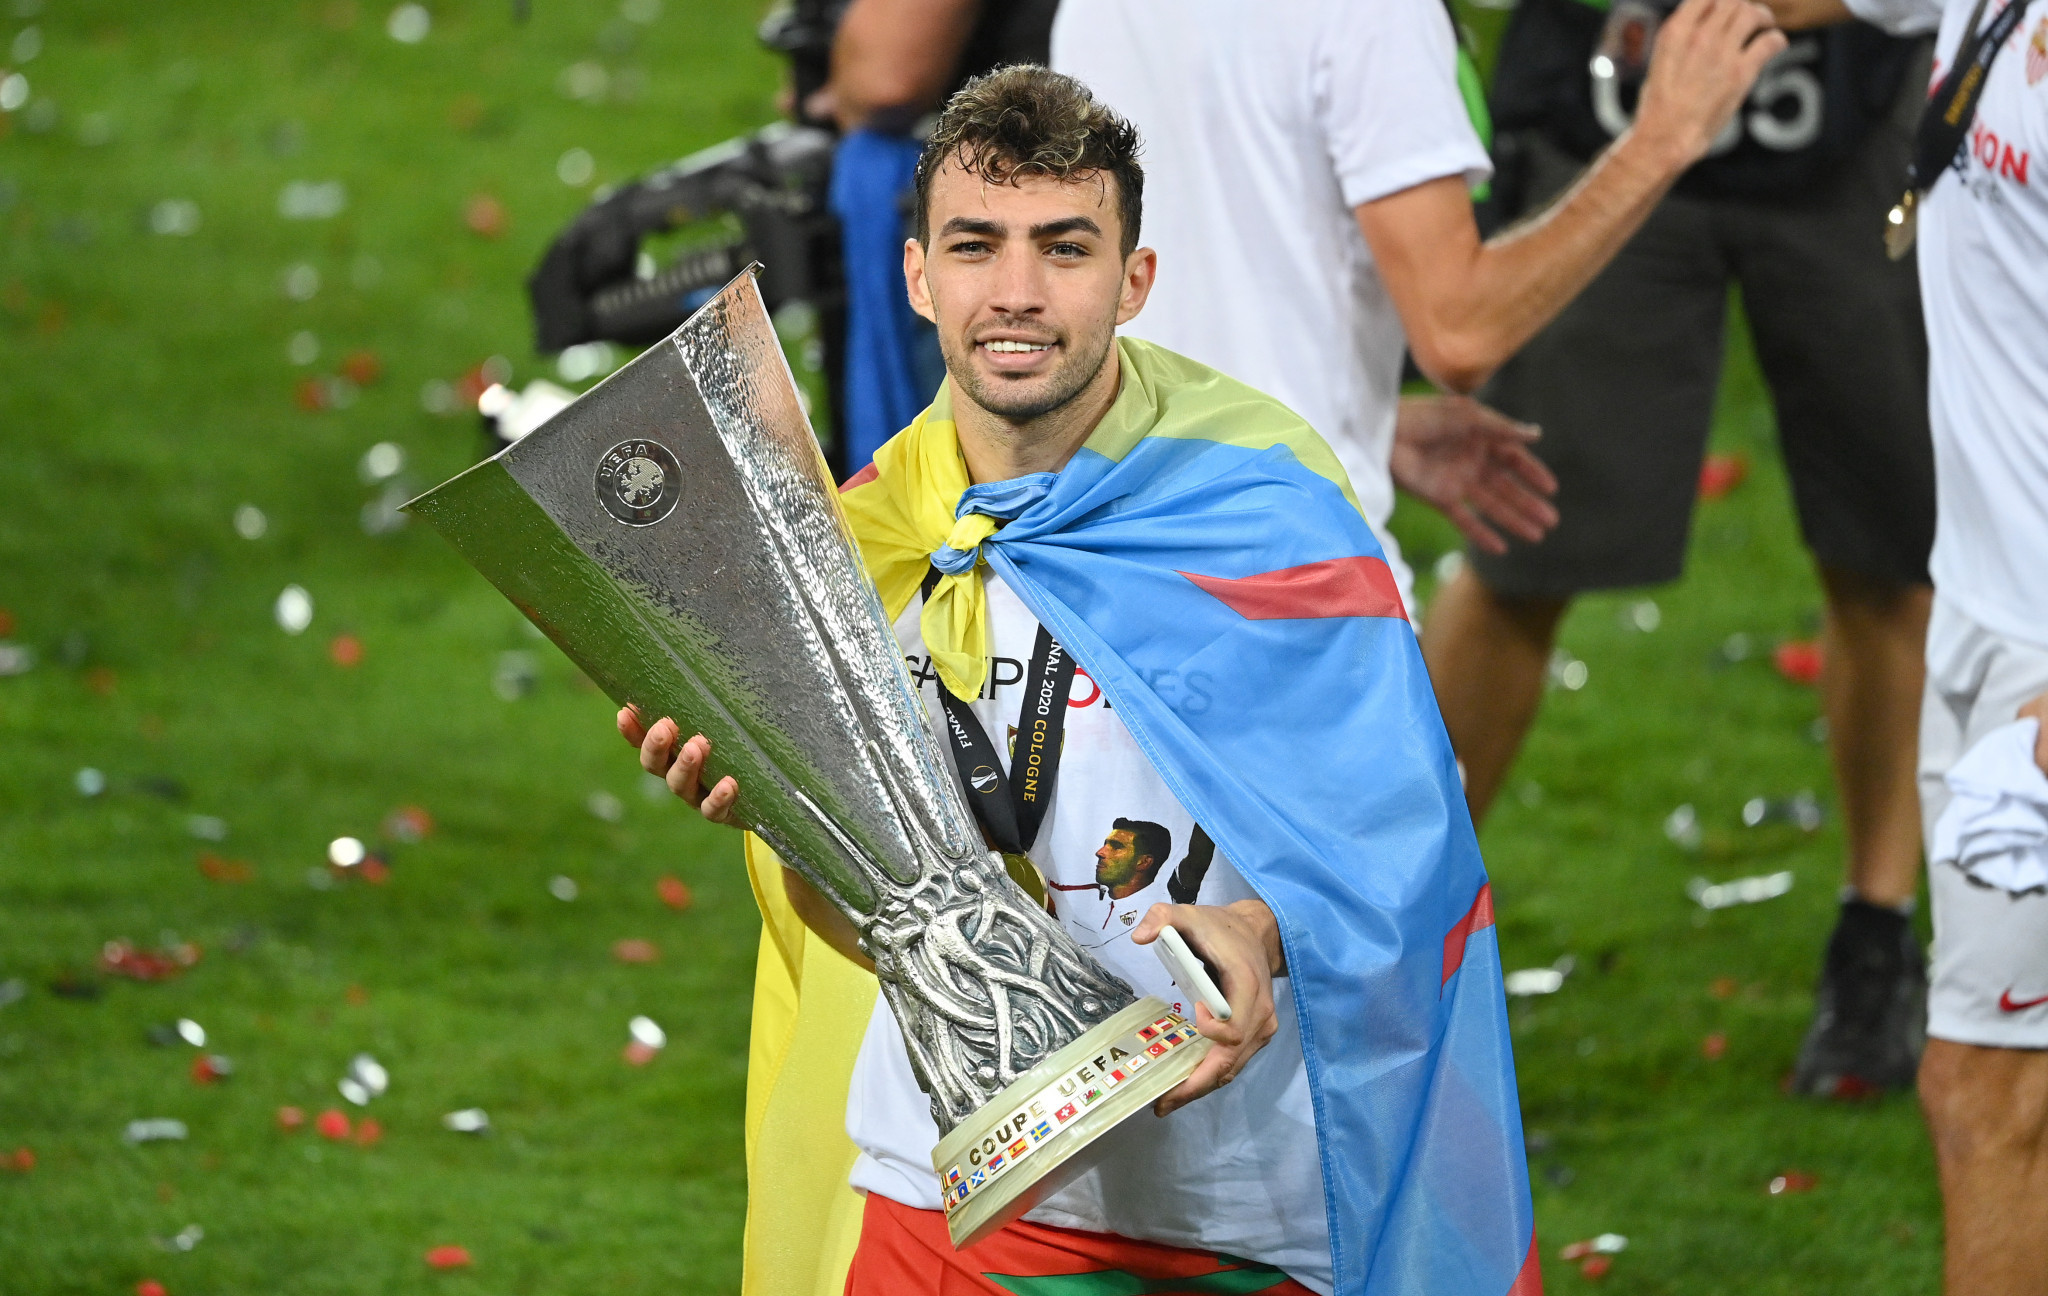 Munir El Haddadi potentially could be permitted to switch nationality from Spain to Morocco under new eligibility rules ©Getty Images